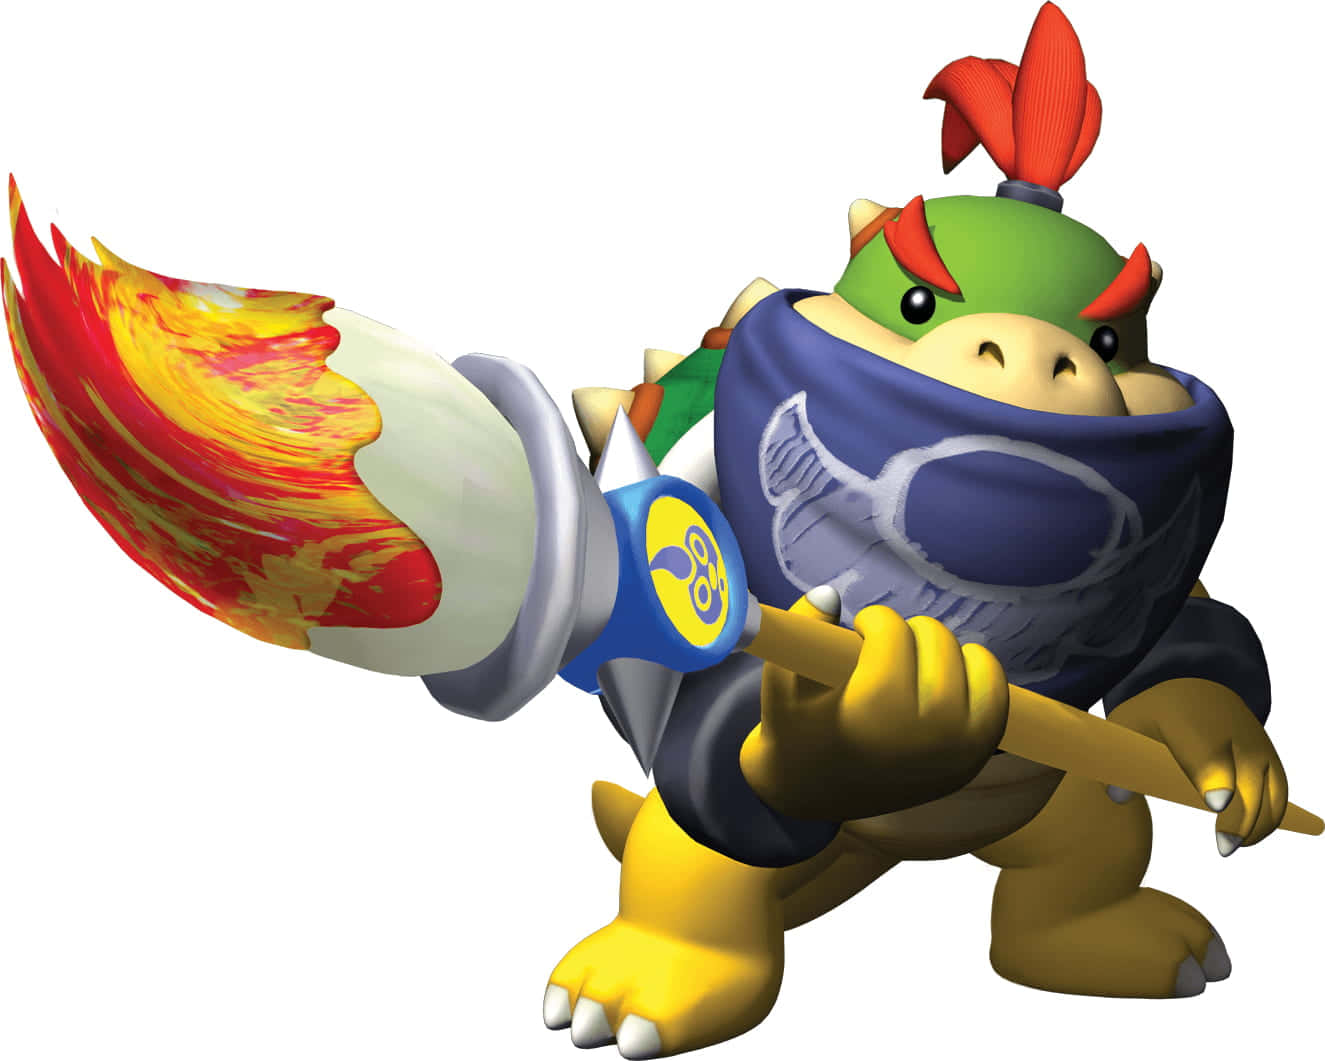 Bowser Jr., the mischievous son of King Bowser, ready for action in the Mushroom Kingdom. Wallpaper